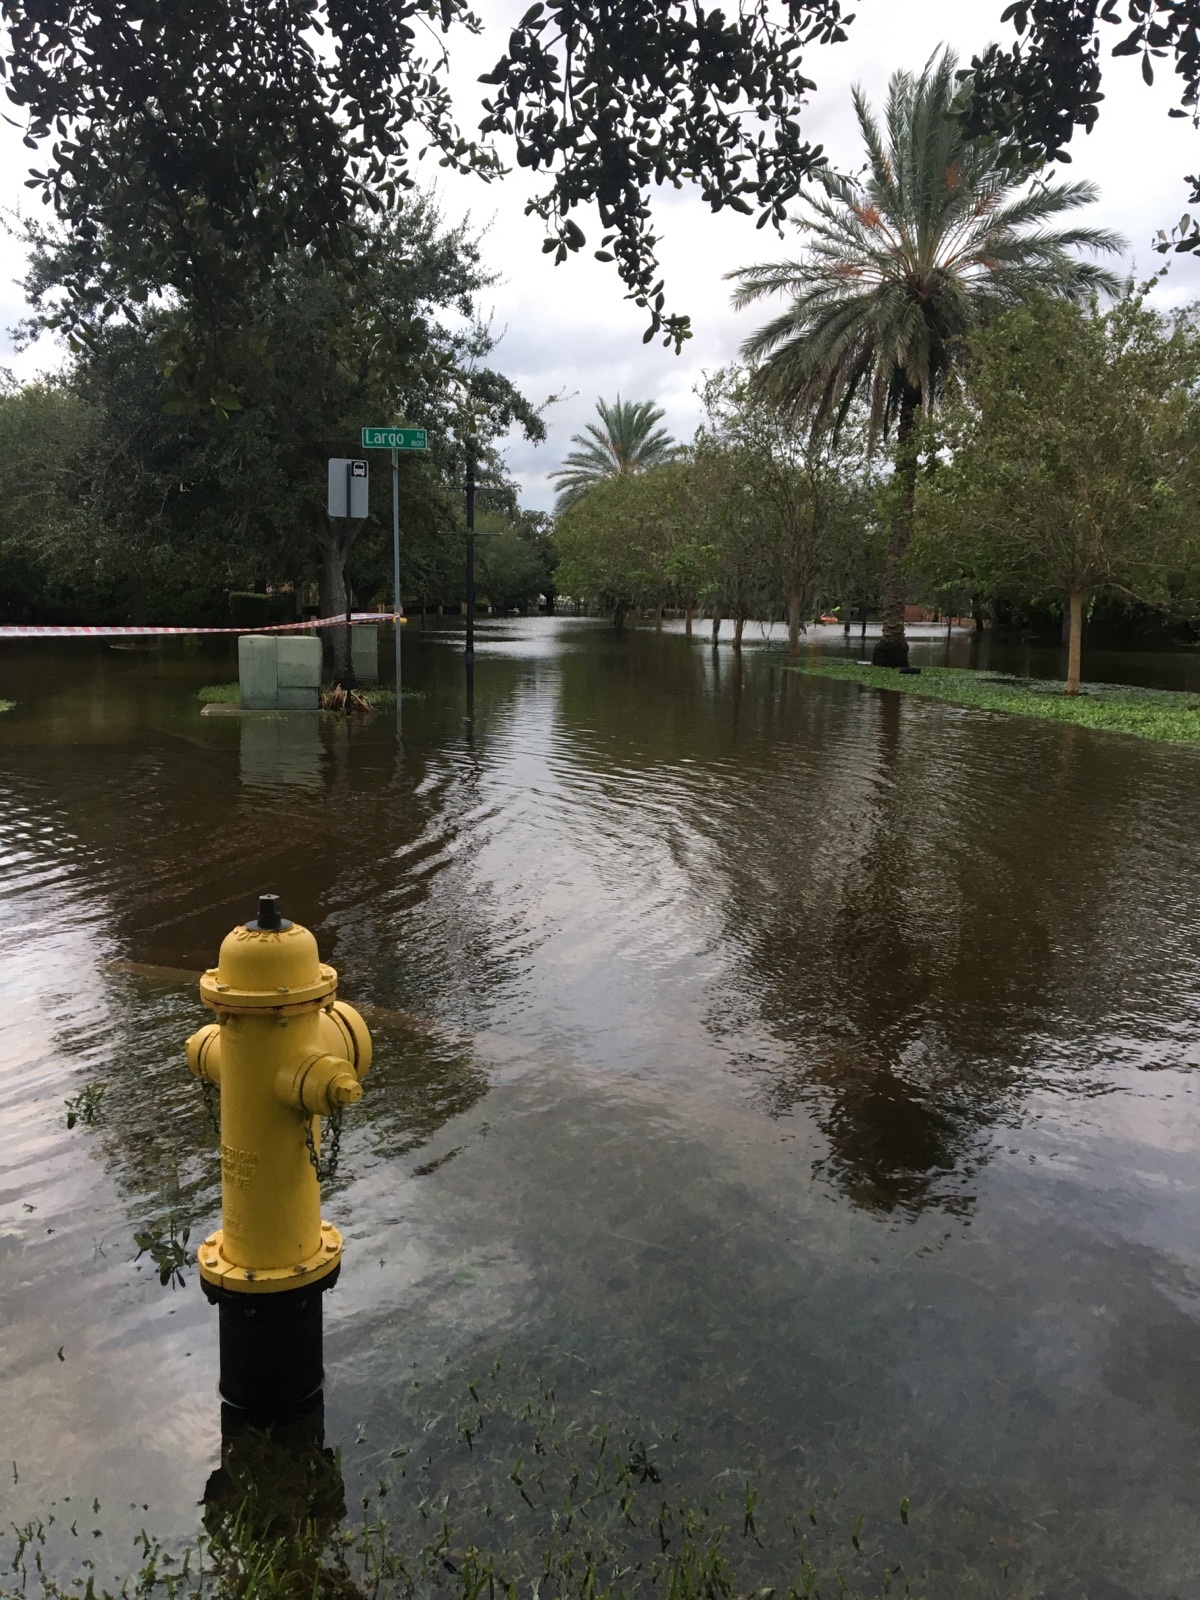 Flooding in San Marco on Monday. (Photo by David Cawton)